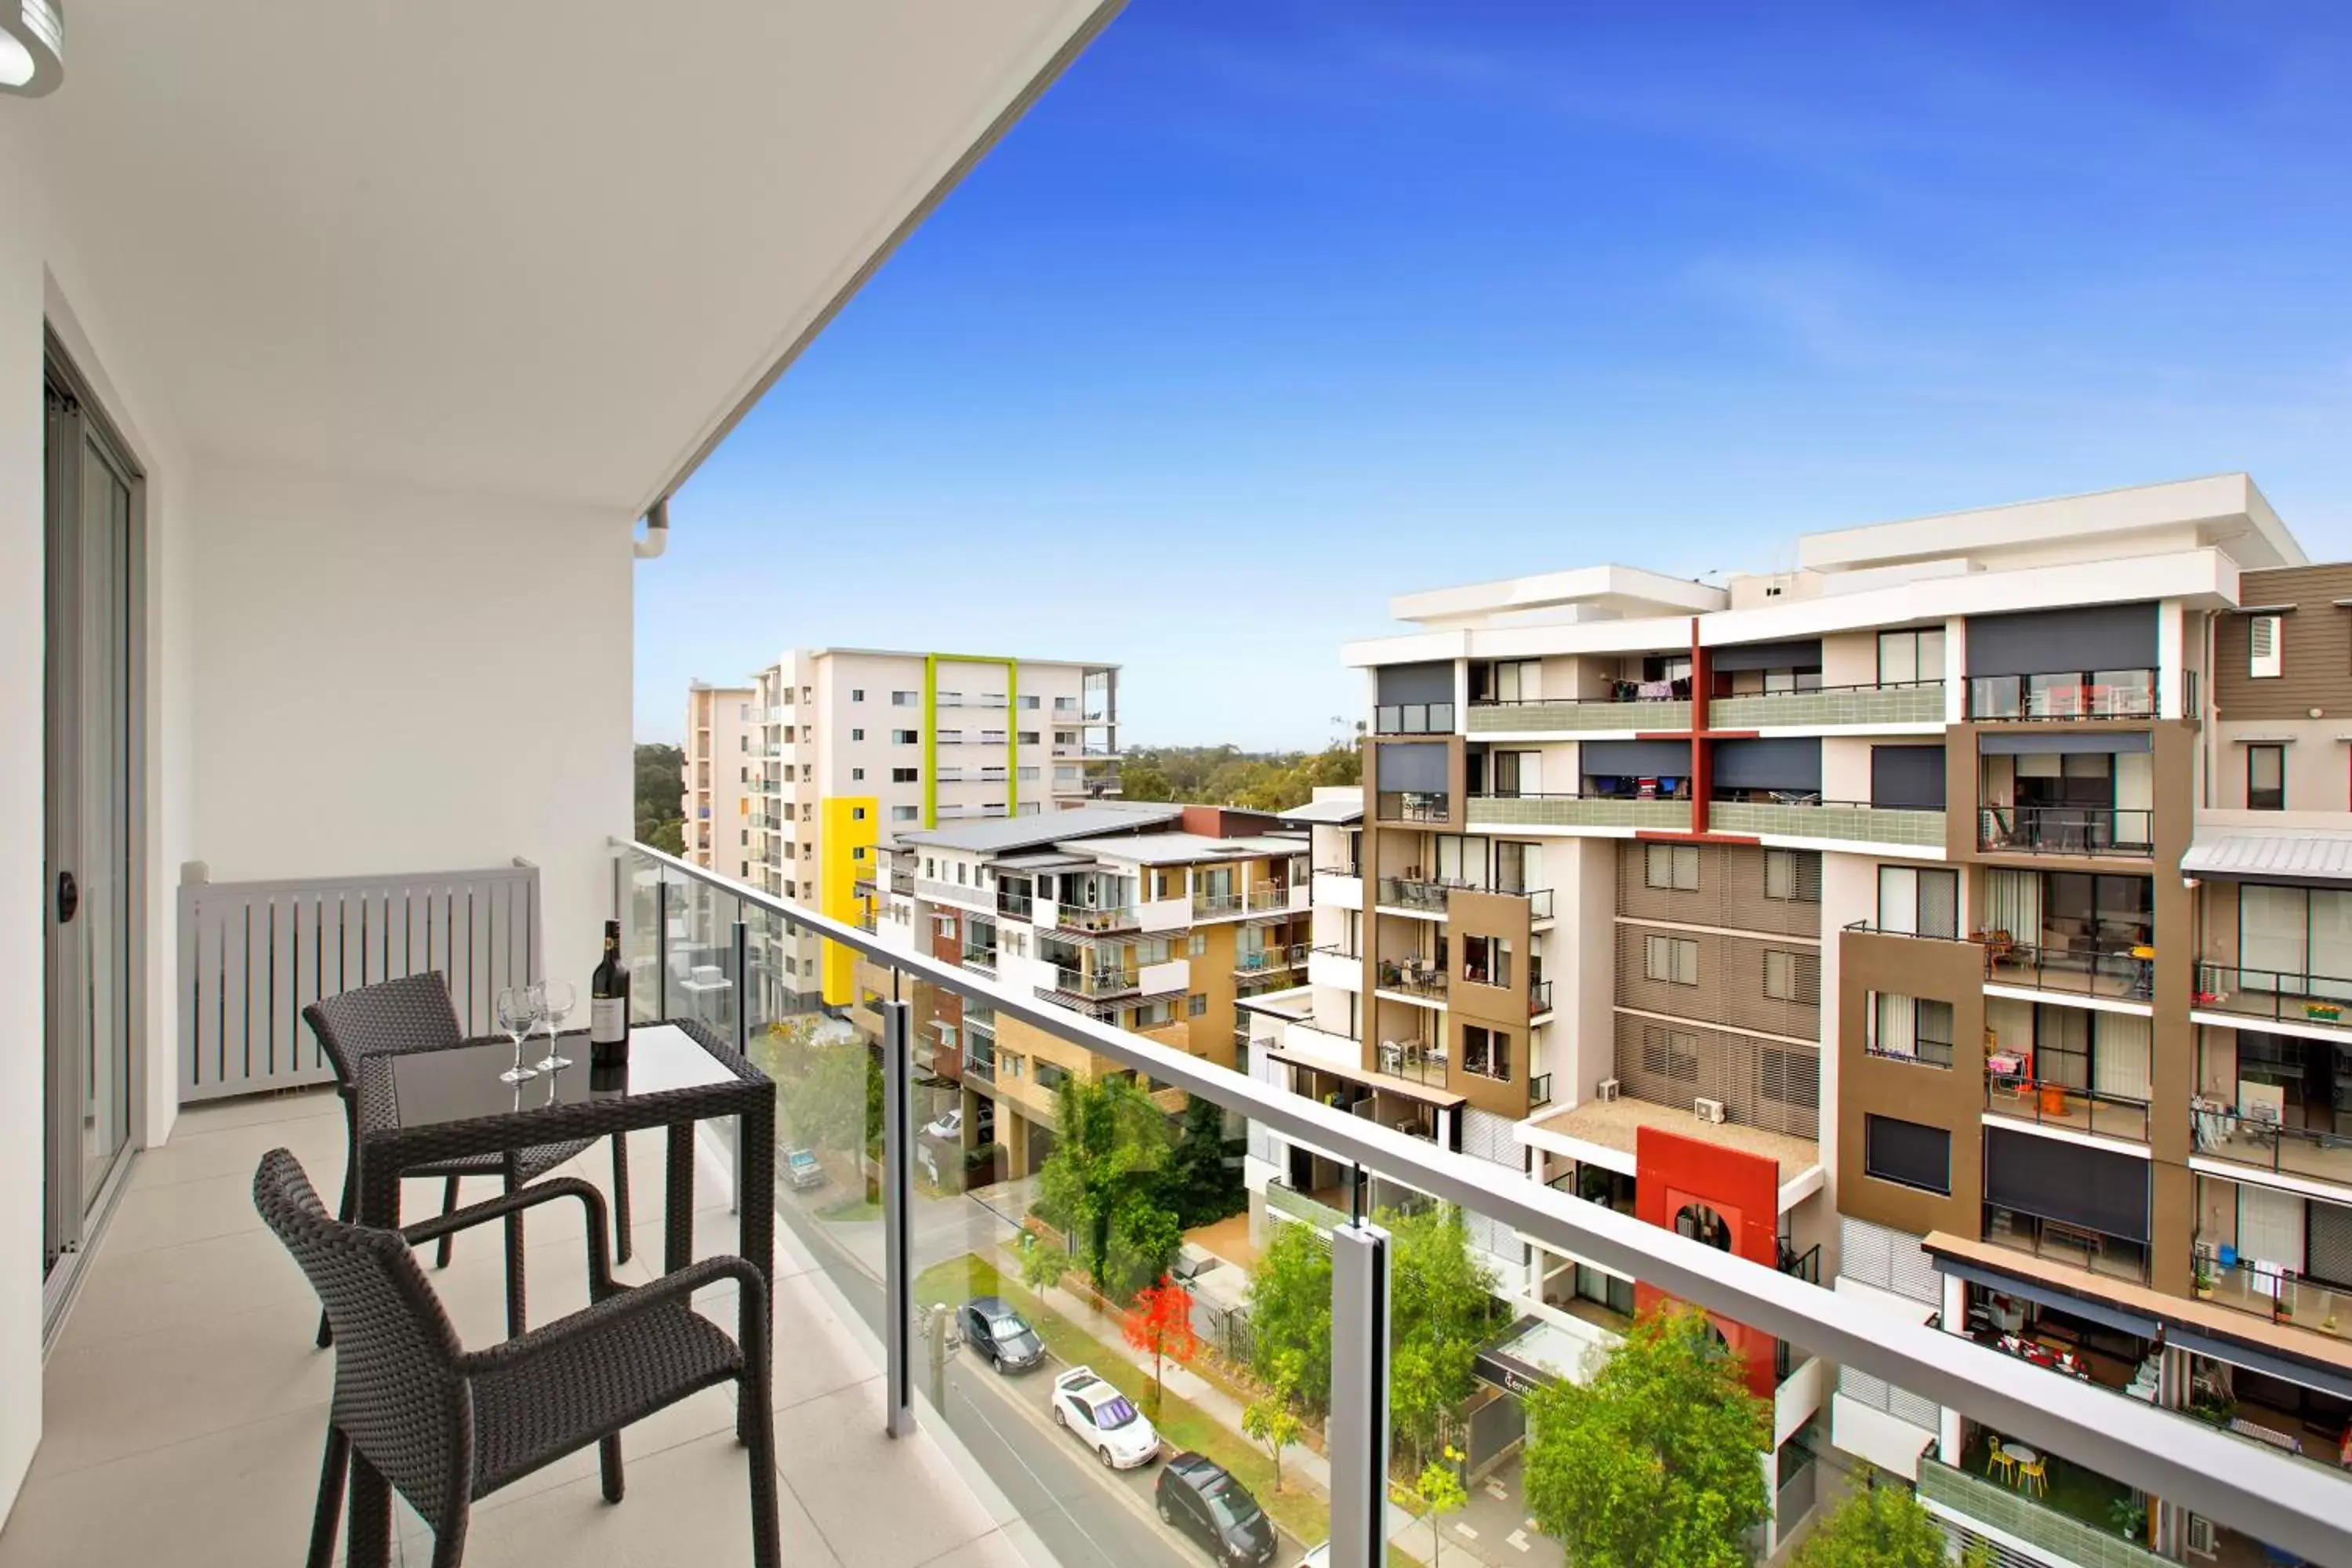 Balcony/Terrace in Quest Chermside on Playfield